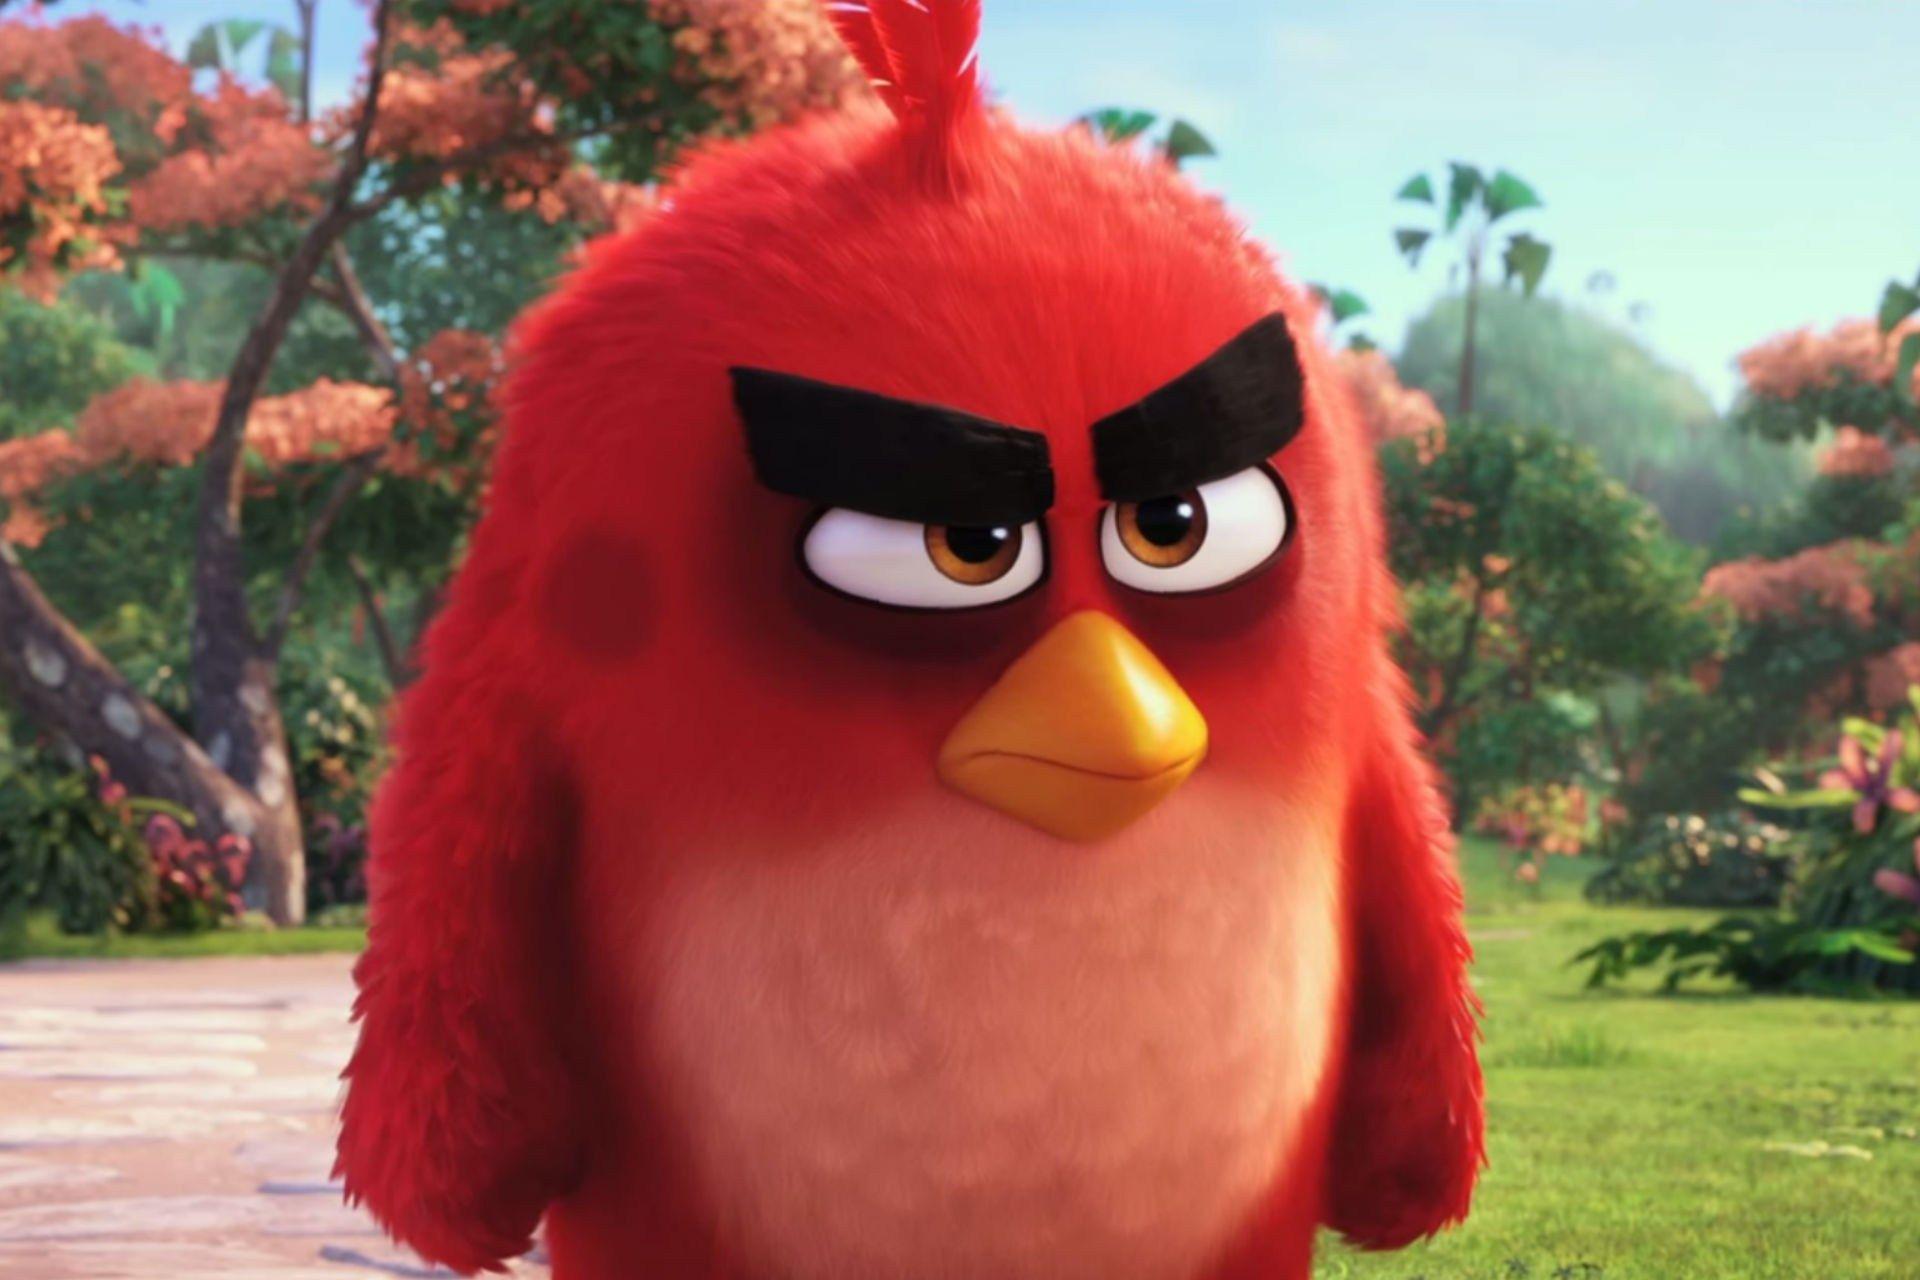 The Angry Birds Movie Wallpaper High Resolution and Quality Download